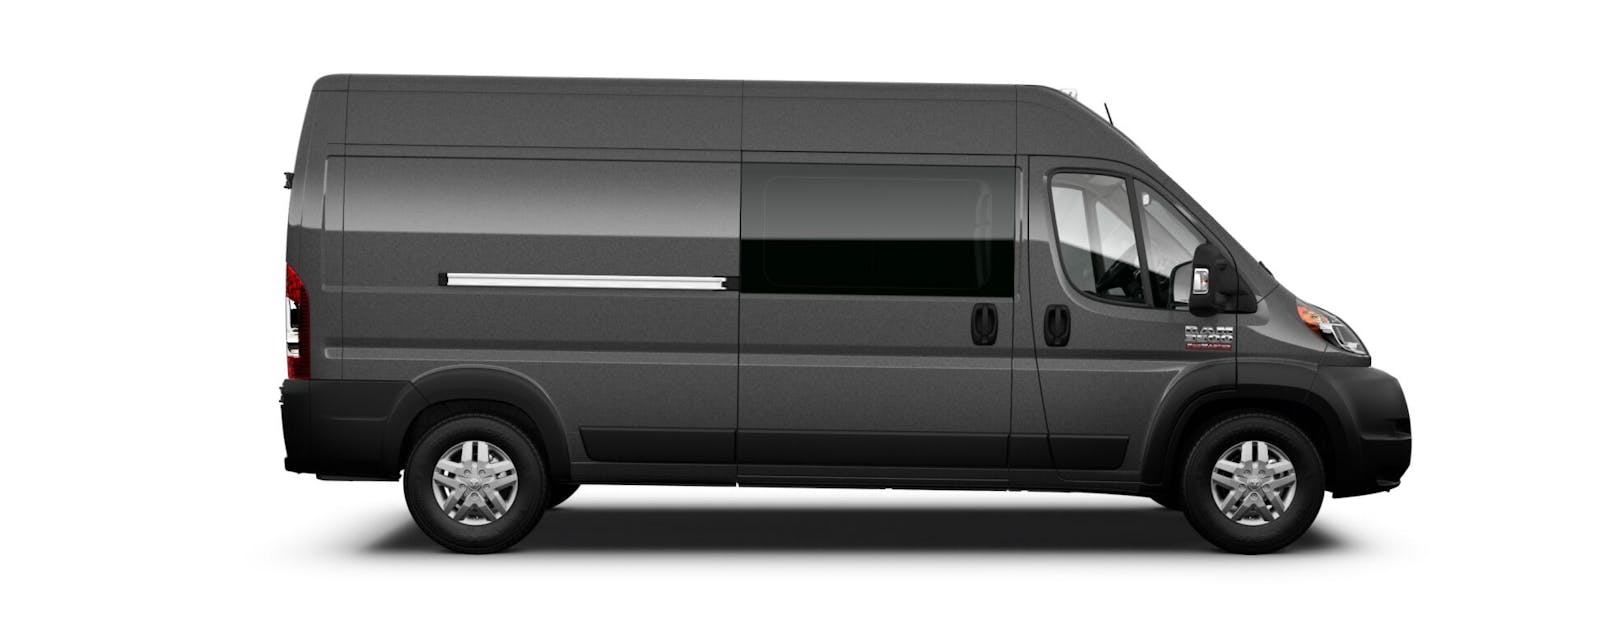 2022 Thor Sequence Tellaro Class B RV RAM ProMaster® 3500 Charcoal Exterior key feature